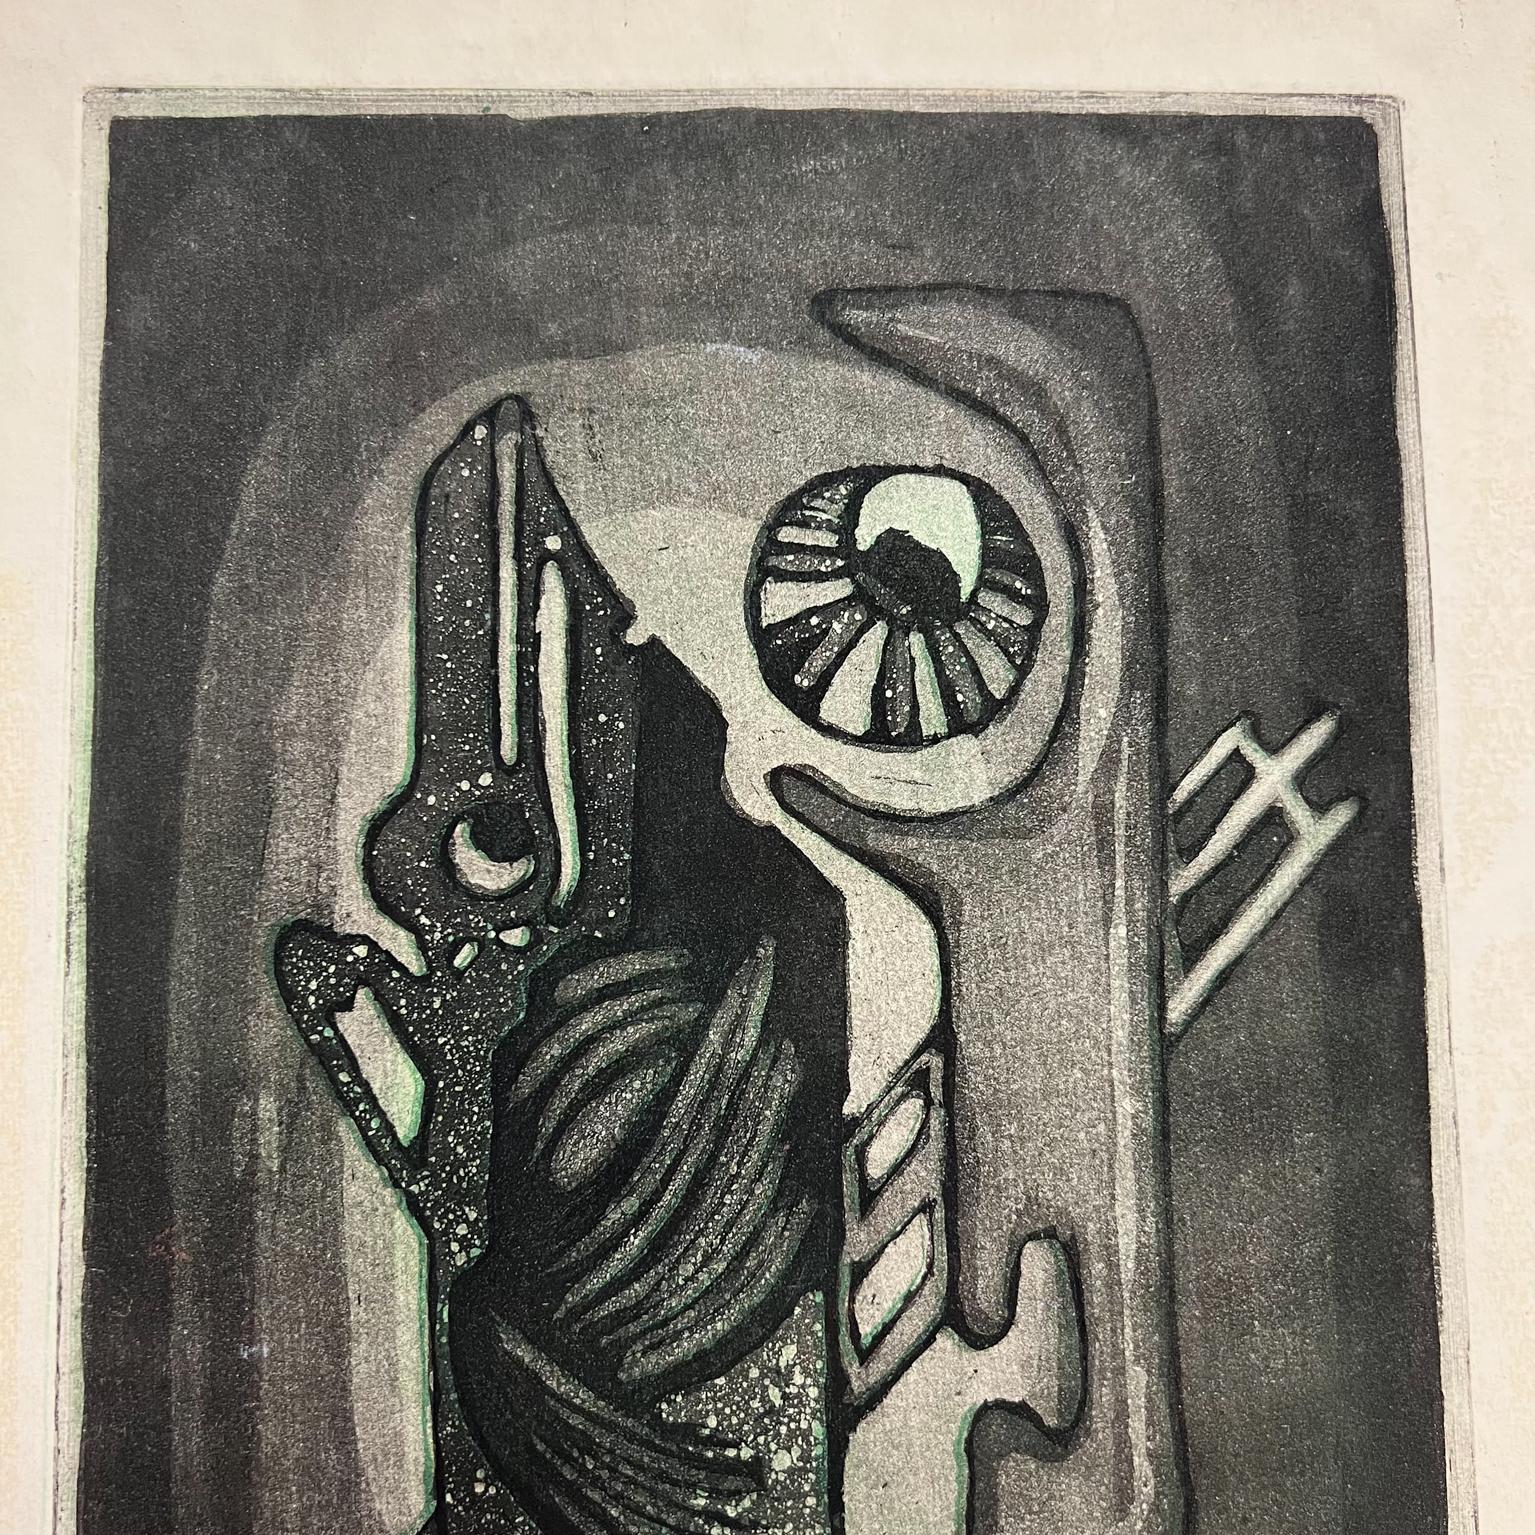 Maria Teresa vieyra rincon original abstract art paper engraving 6/25.
Titled PEZ (Fish) Figure 1.
COA present 
Measures: 13.75 x 20 art 13.5 x 9.25.
Preowned original vintage condition.
Refer to images.